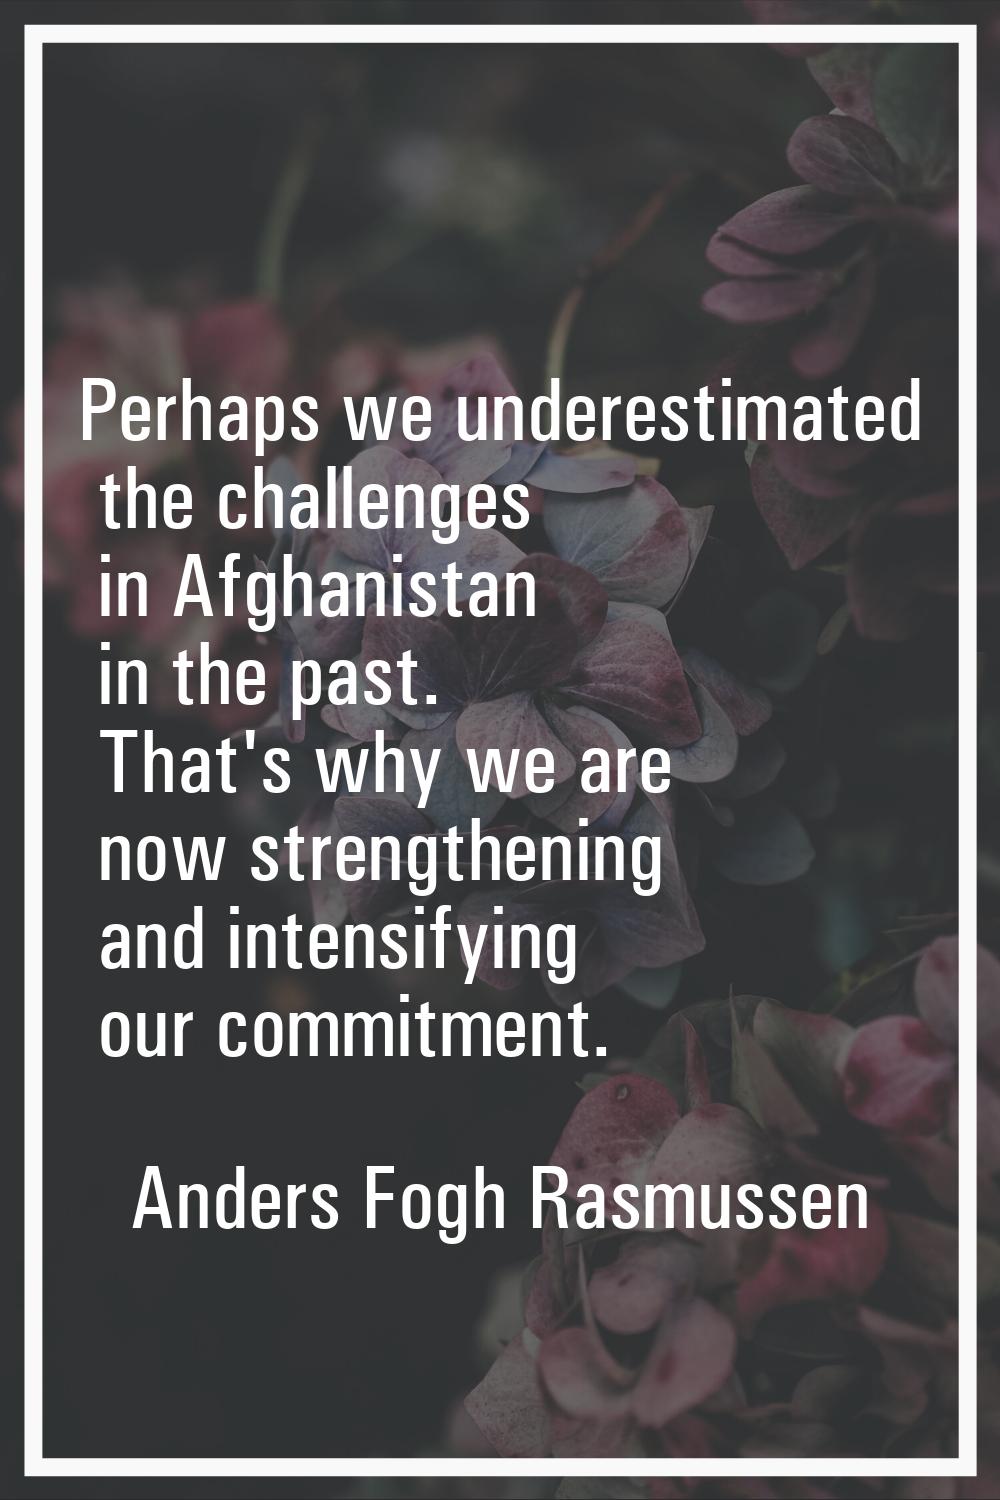 Perhaps we underestimated the challenges in Afghanistan in the past. That's why we are now strength